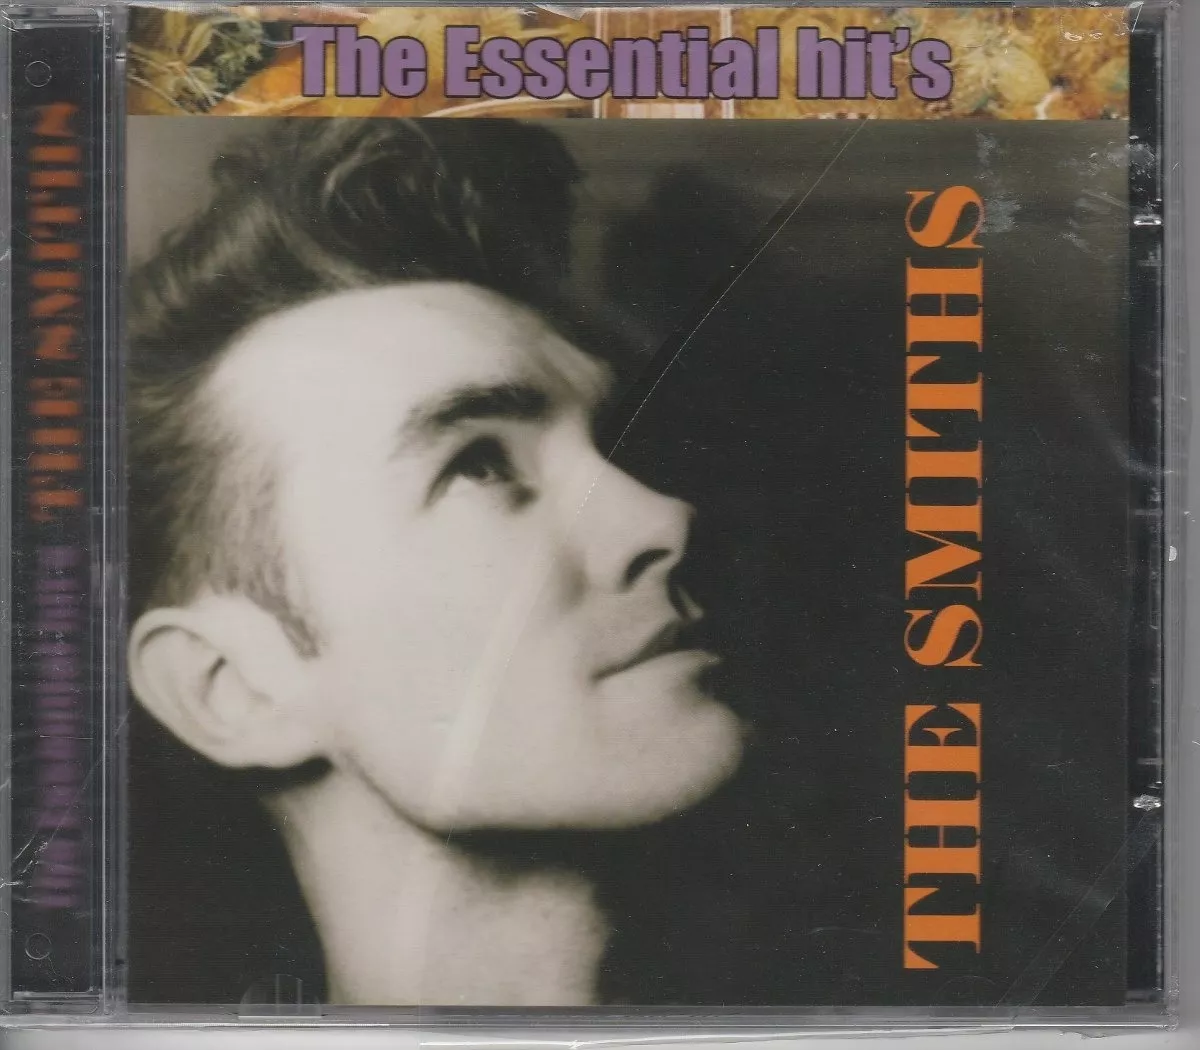 Cd The Smiths The Essential Hits